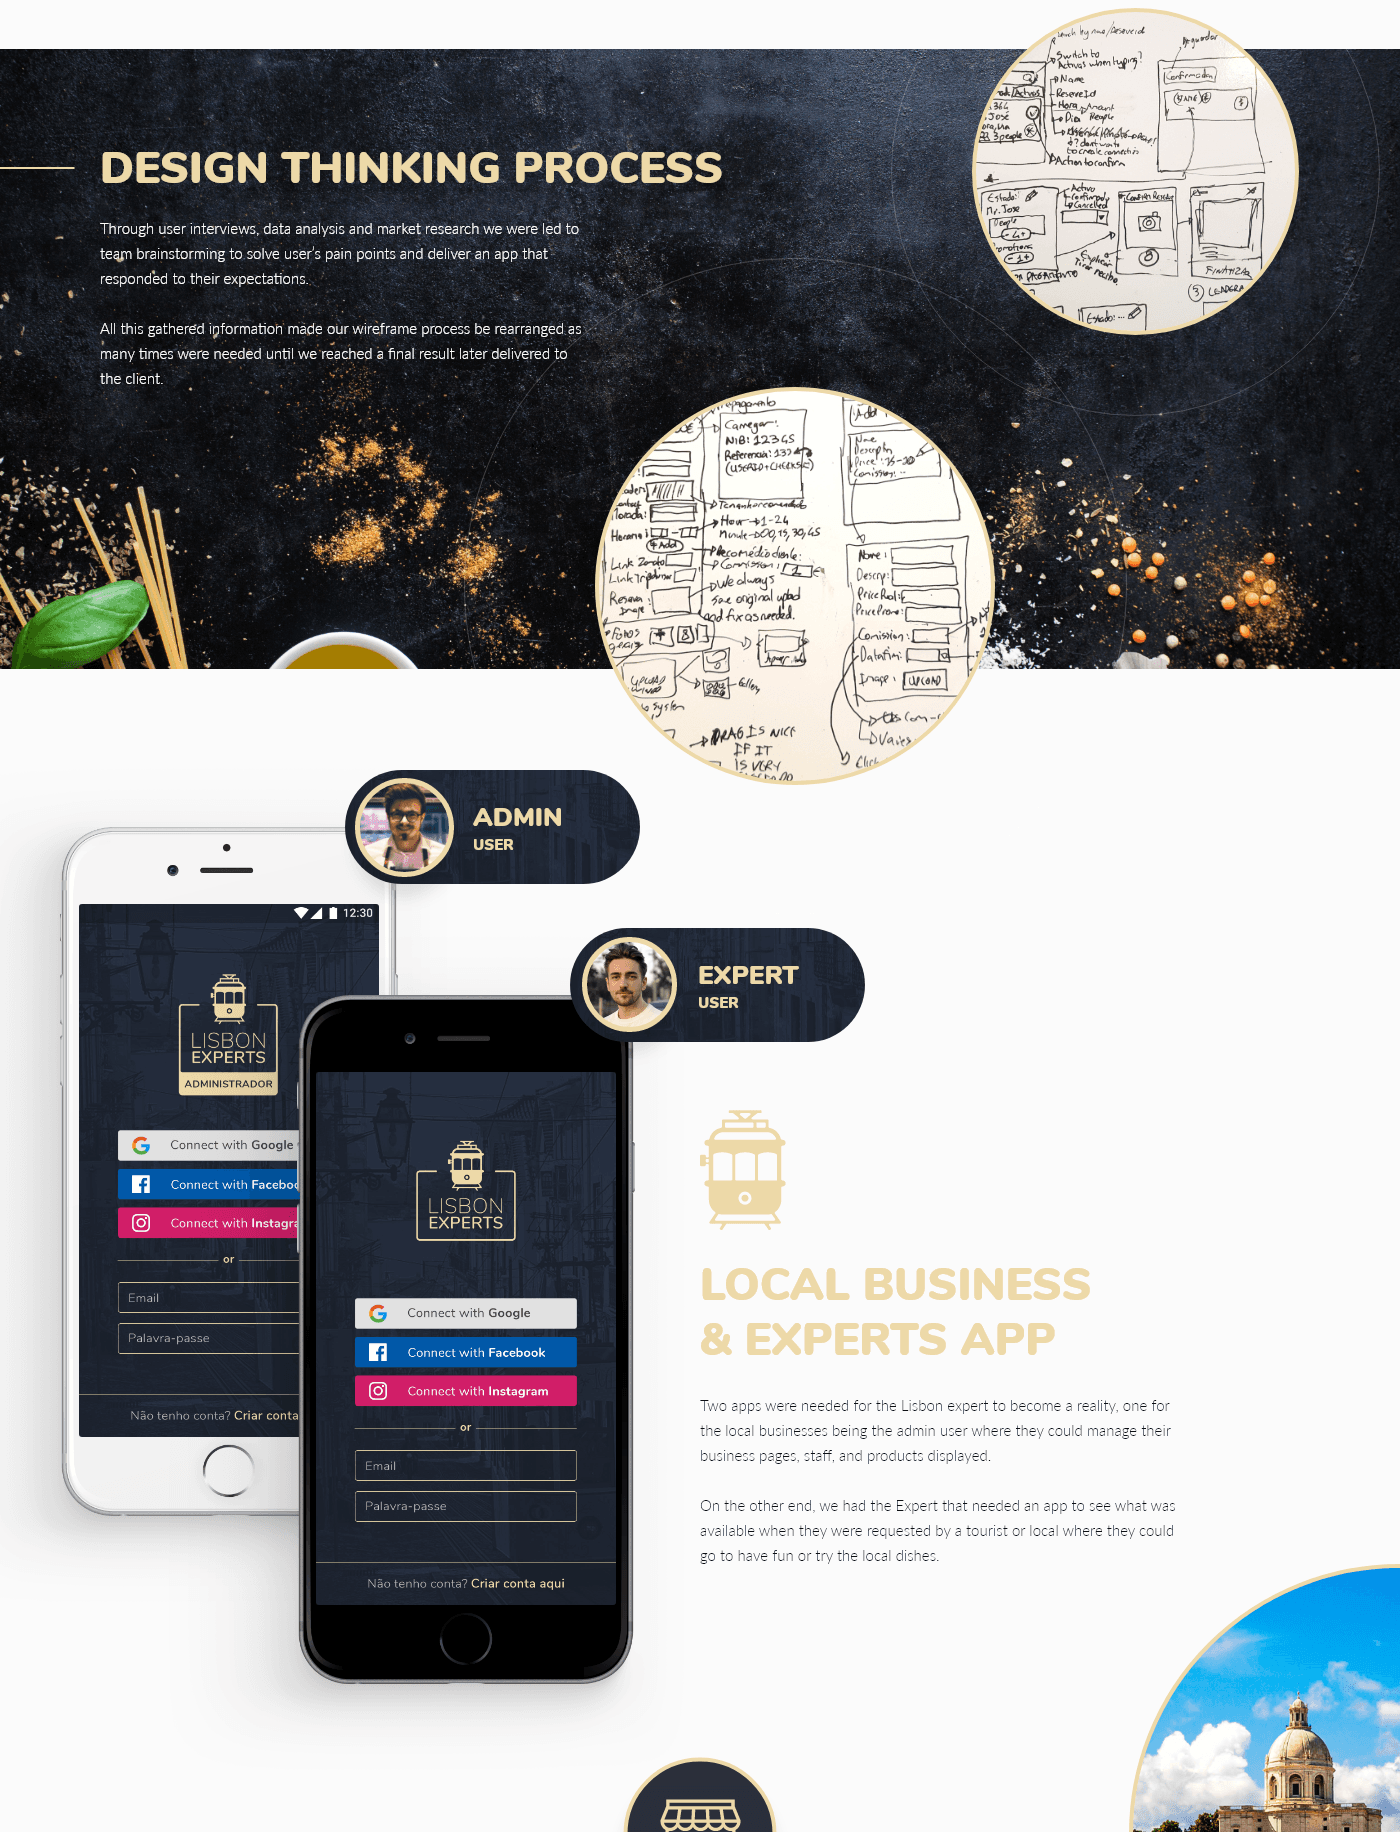 /interface/portfolio/local-experts/local-experts-1.png